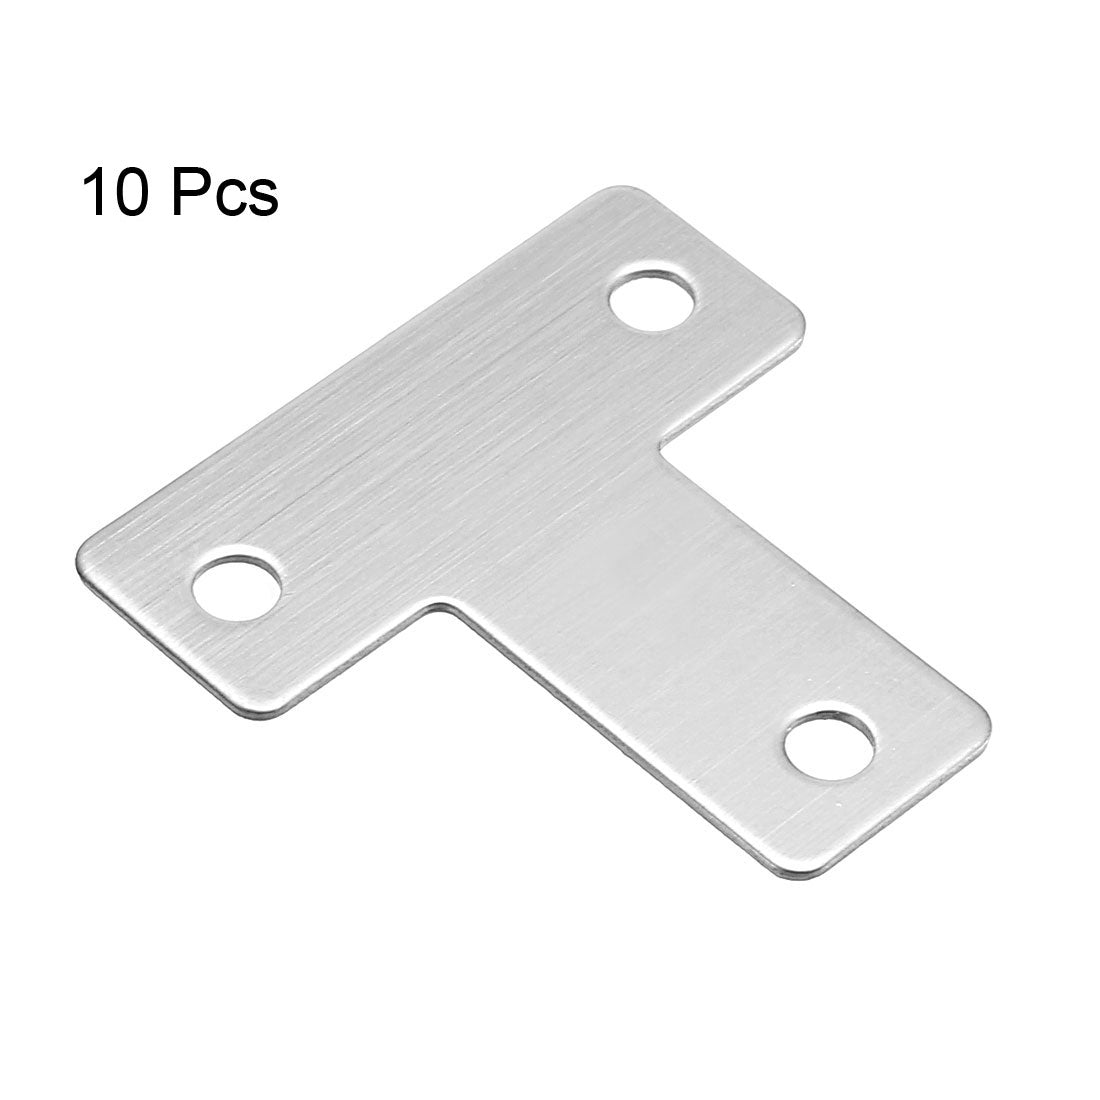 uxcell Uxcell Flat T Shape Repair Mending Plate, 43mmx43mm, Stainless Steel Joining Bracket Support Brace, 10 Pcs